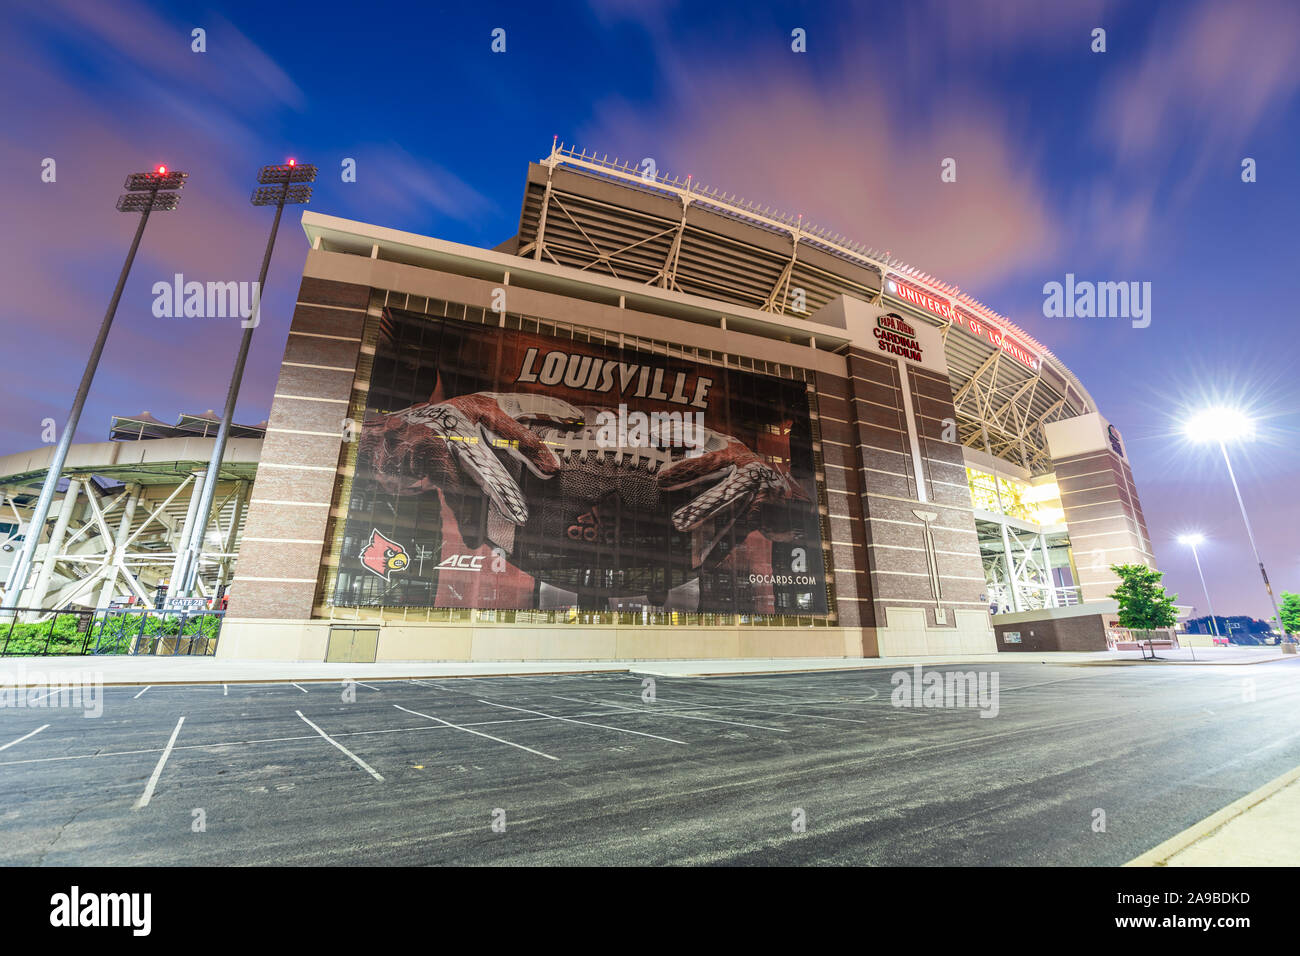 The University of Louisville Cardinal stadium recently was renovated to be able to reach a capacity of 55,000 for their football team. Stock Photo